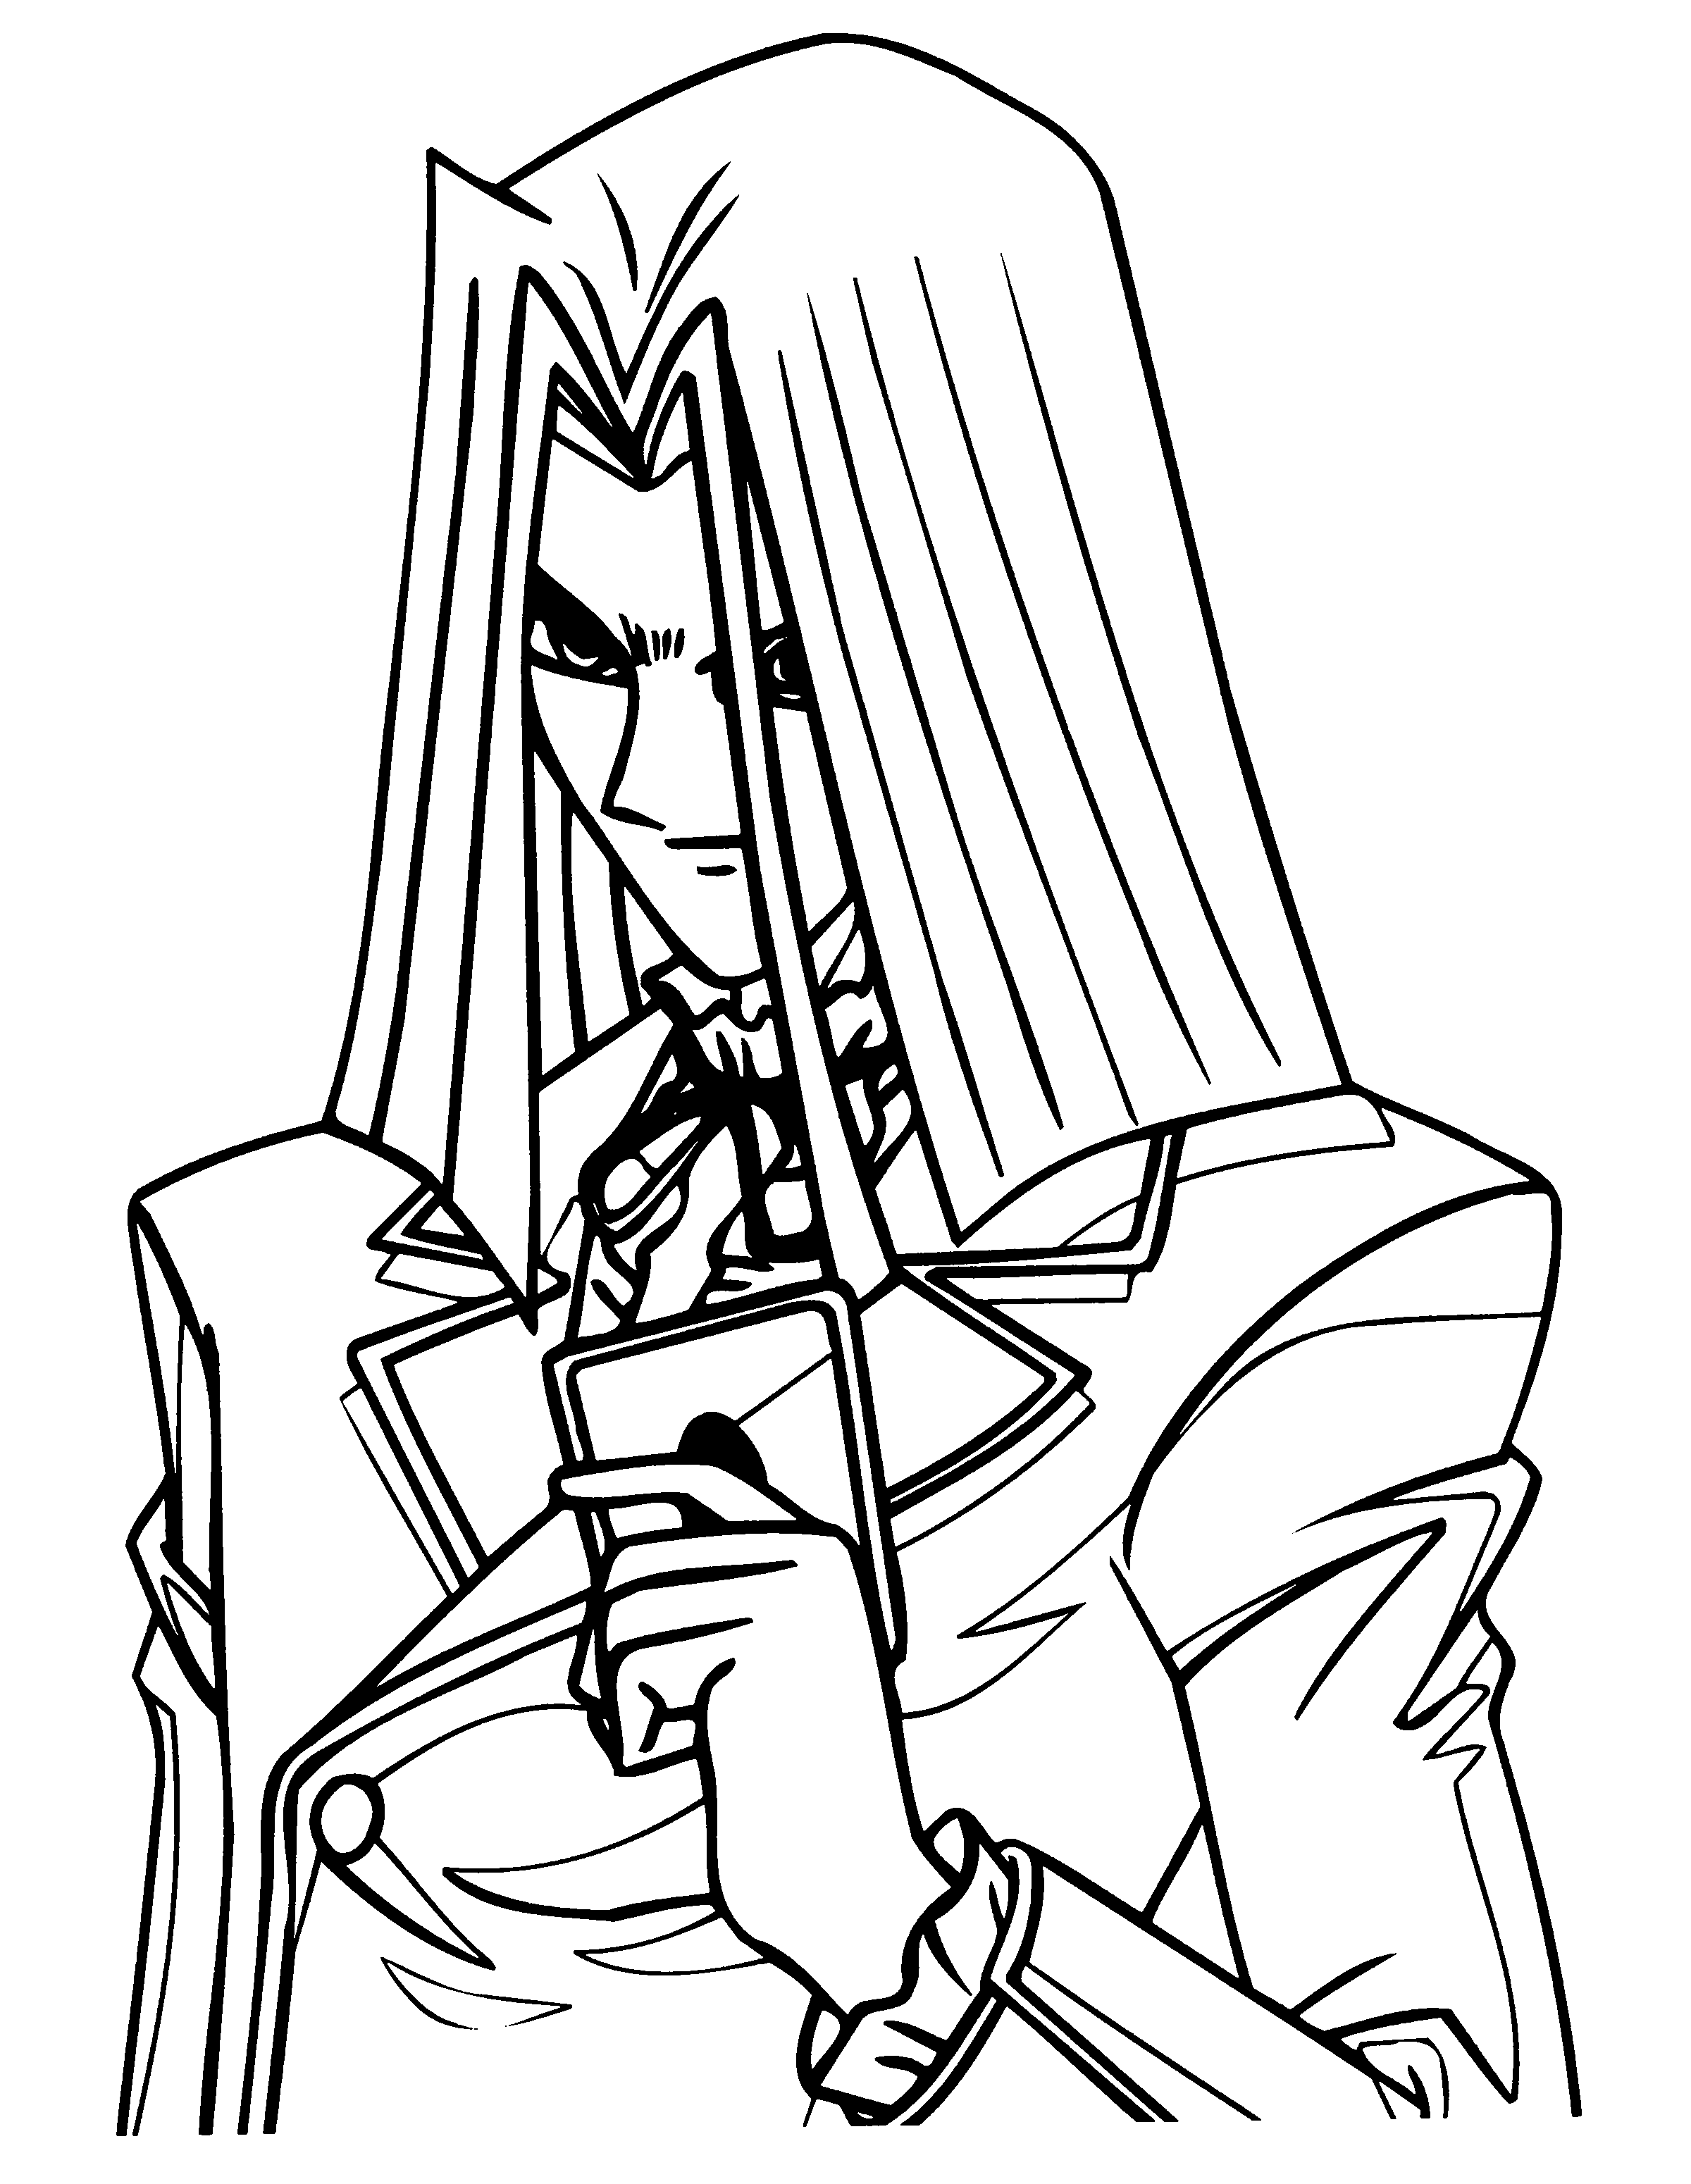 Yu Gi Oh Zexal Coloring Pages Sketch Coloring Page 